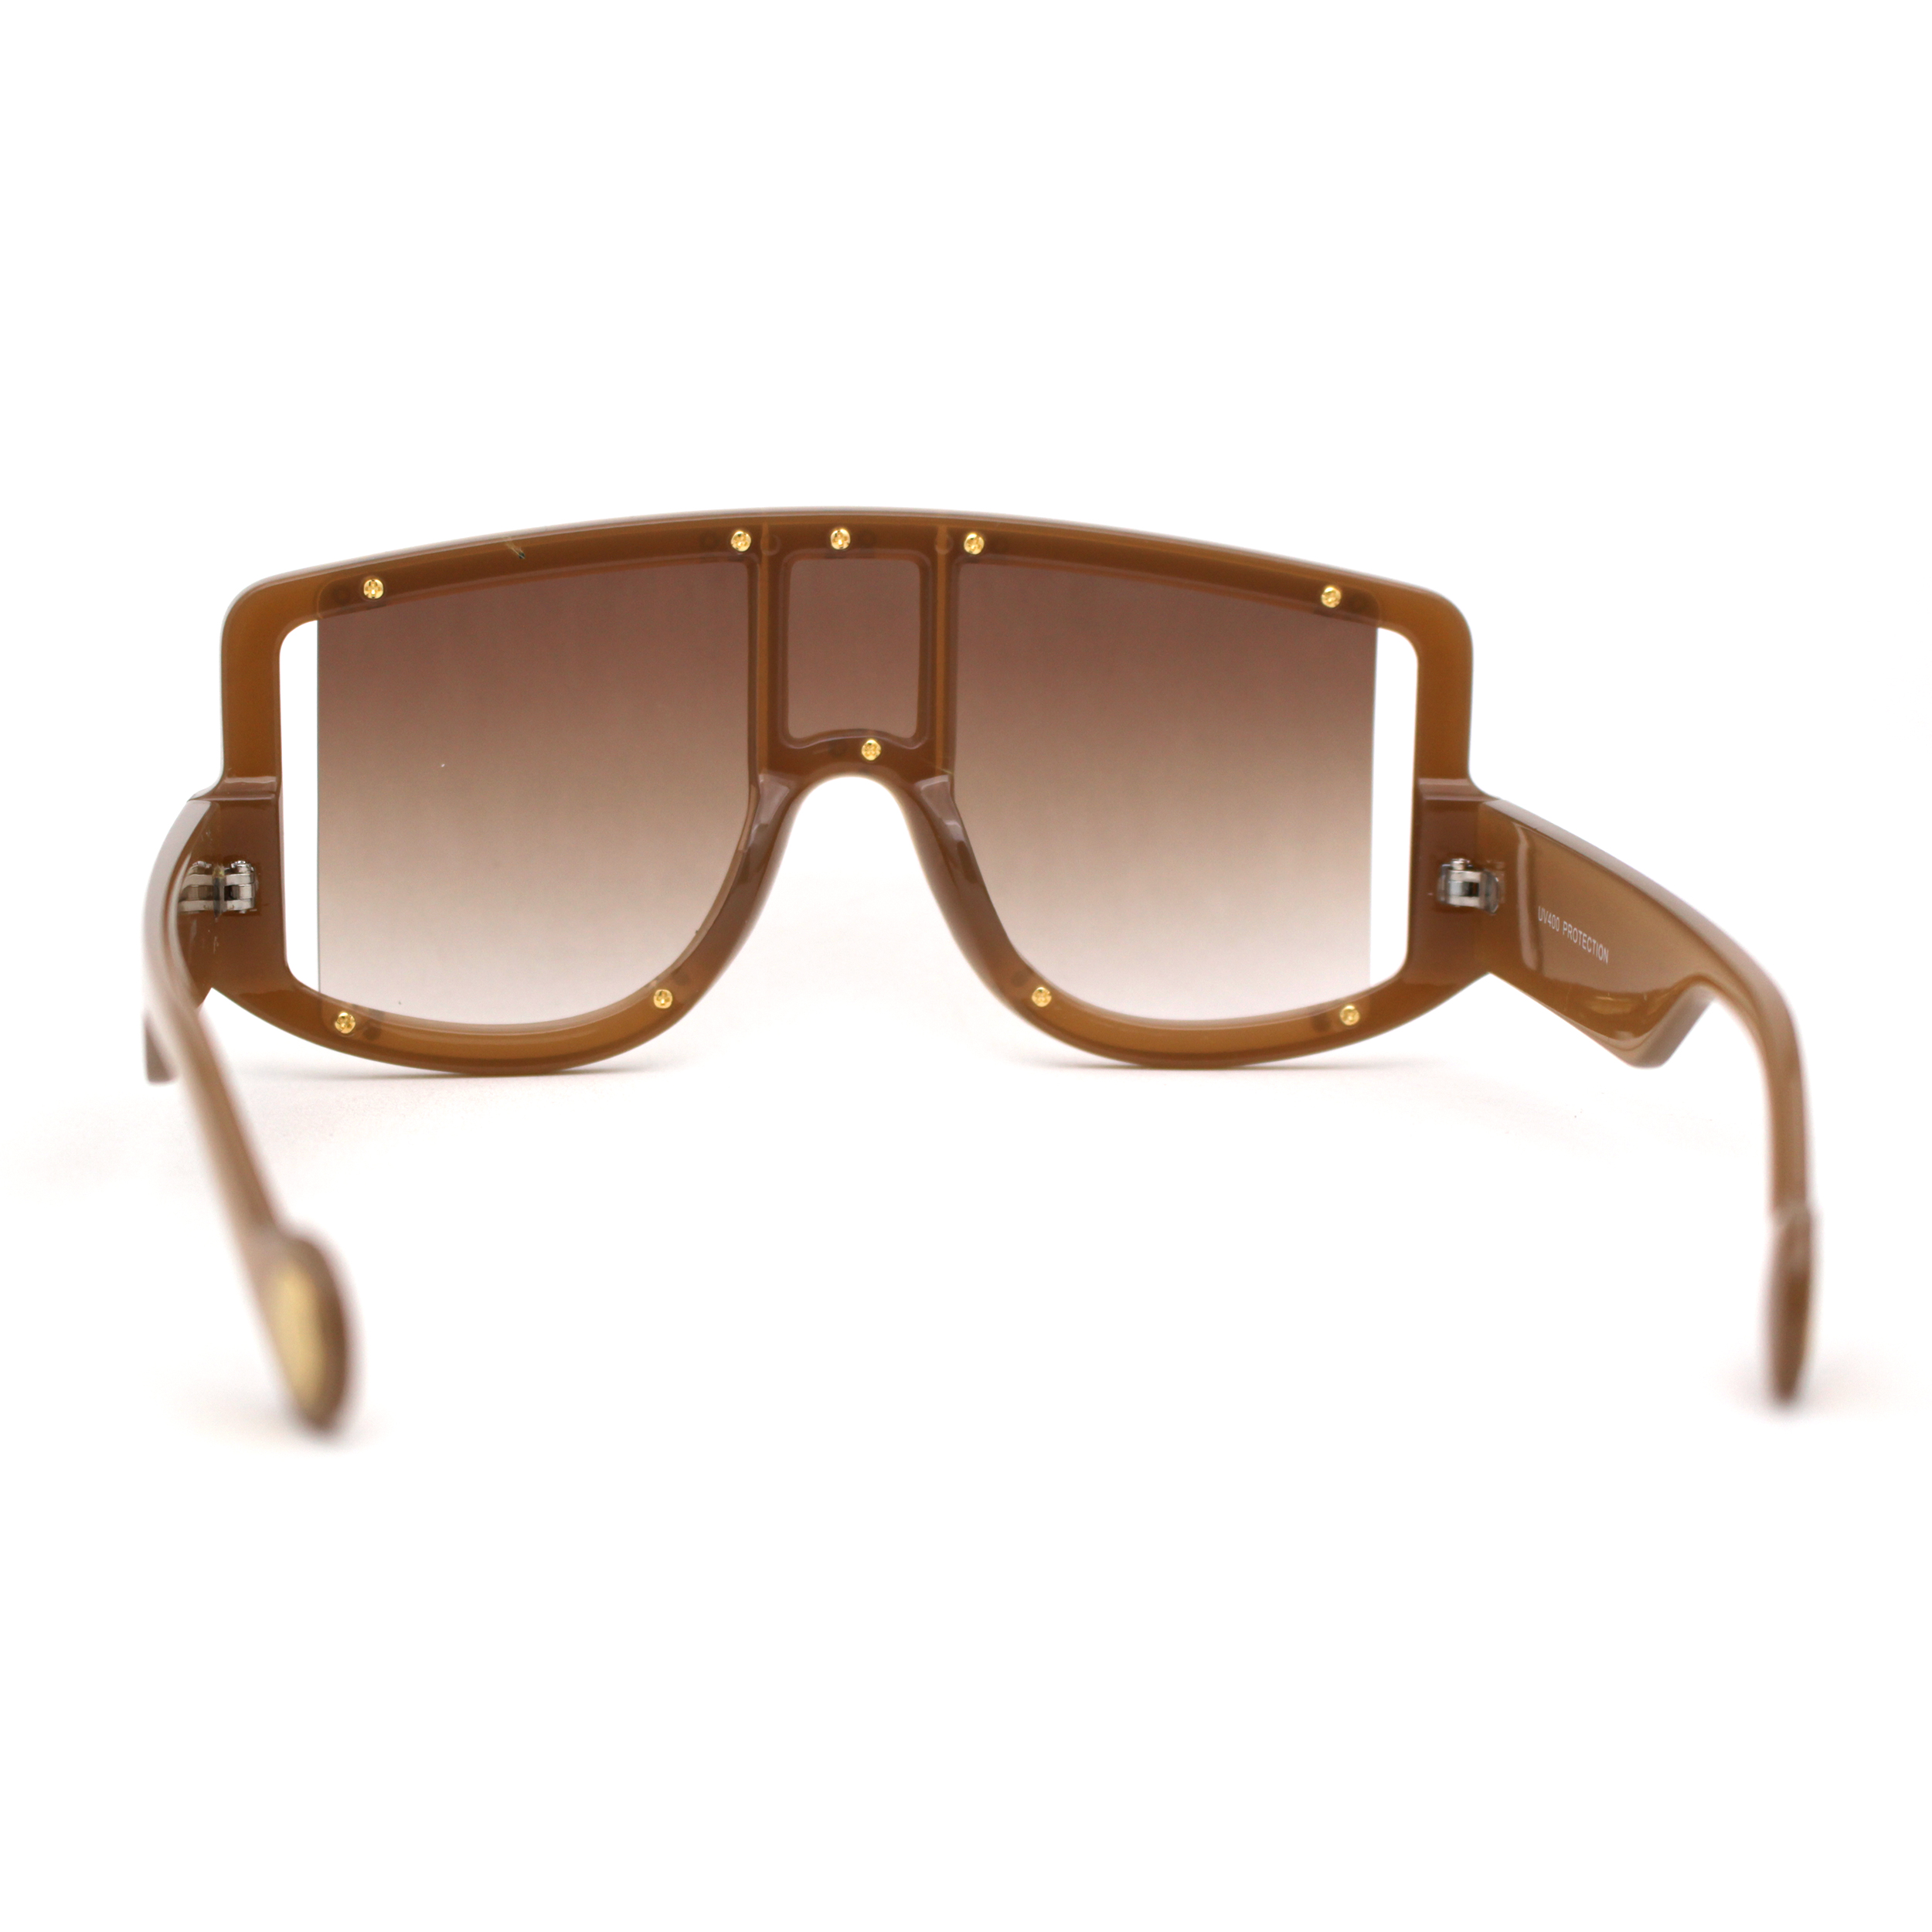 Multi Panel Shield Drop Temple Plastic Curved Top Racer Sunglasses All Brown - image 4 of 4